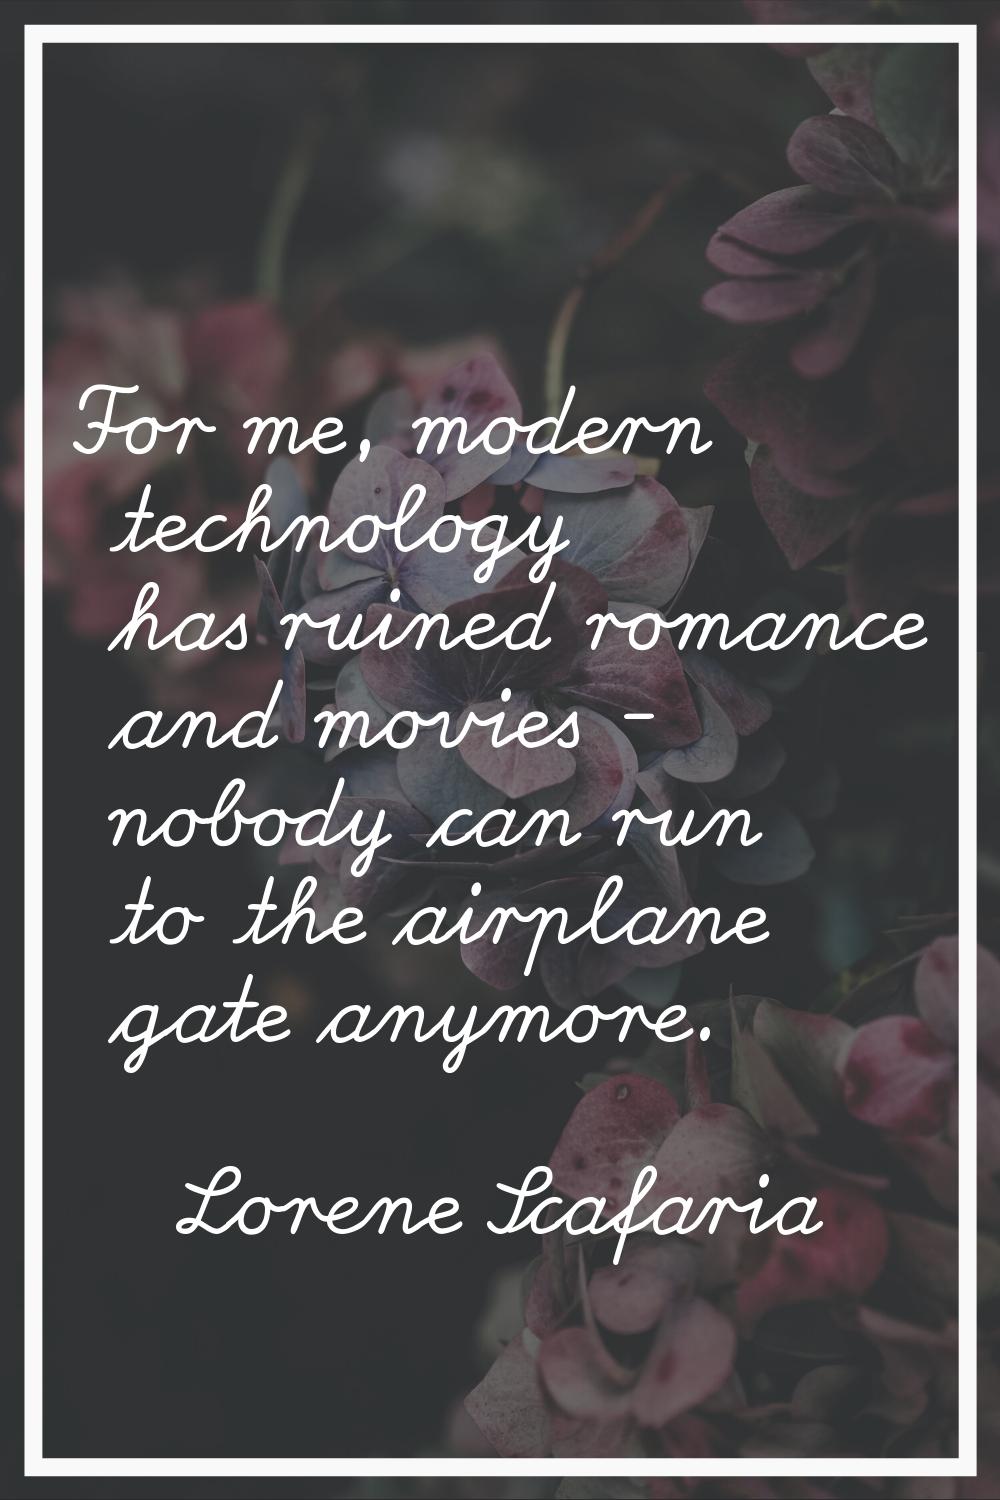 For me, modern technology has ruined romance and movies - nobody can run to the airplane gate anymo